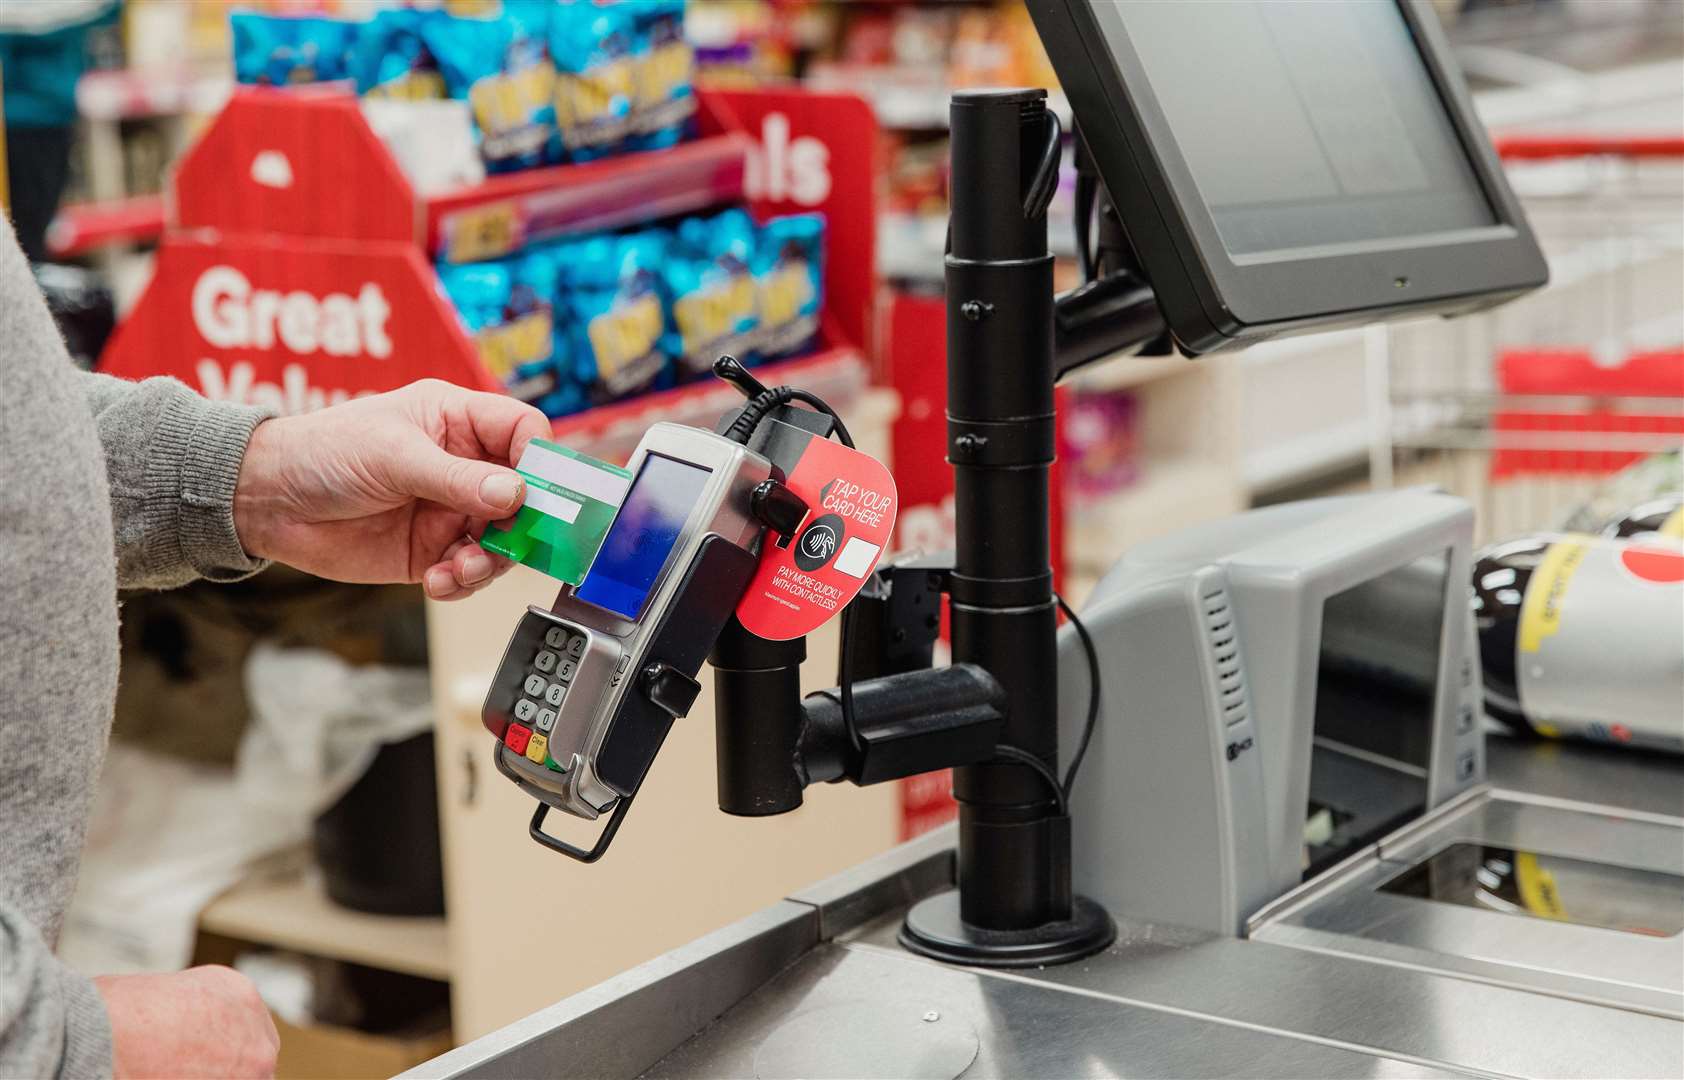 If self-checkouts are problematic for stores introduce more cashiers. Image: iStock.